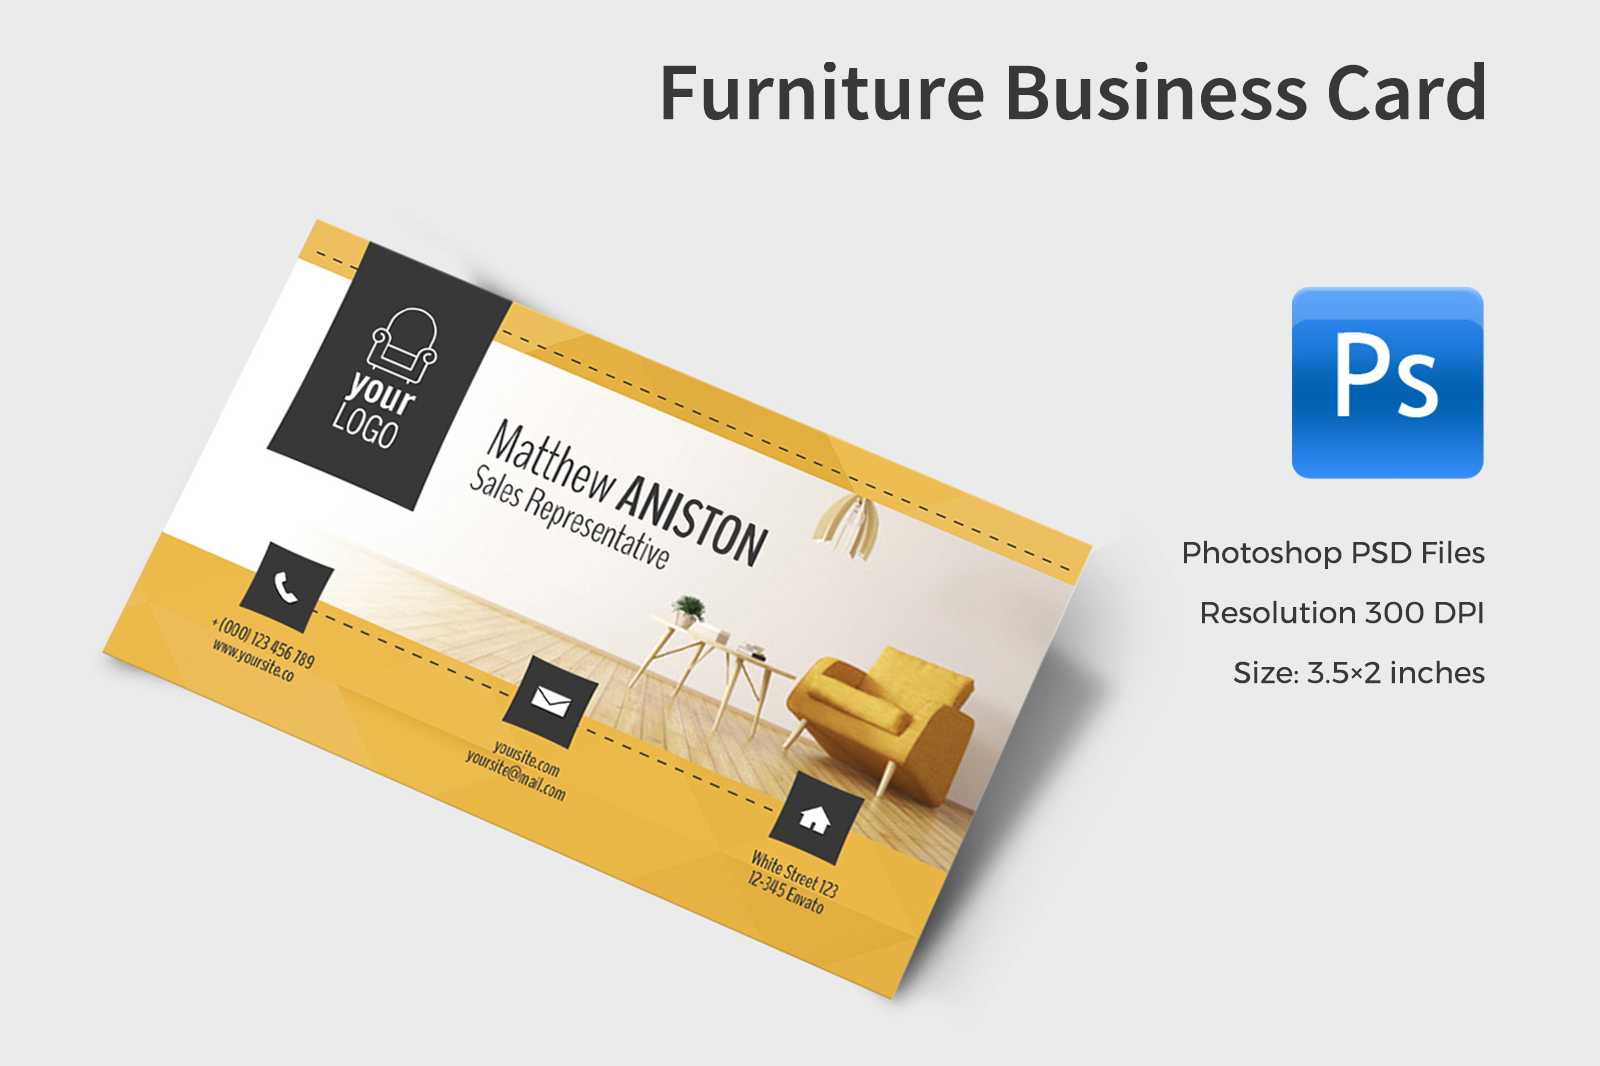 Furniture Business Card In Business Card Templates On Regarding Business Card Template Size Photoshop